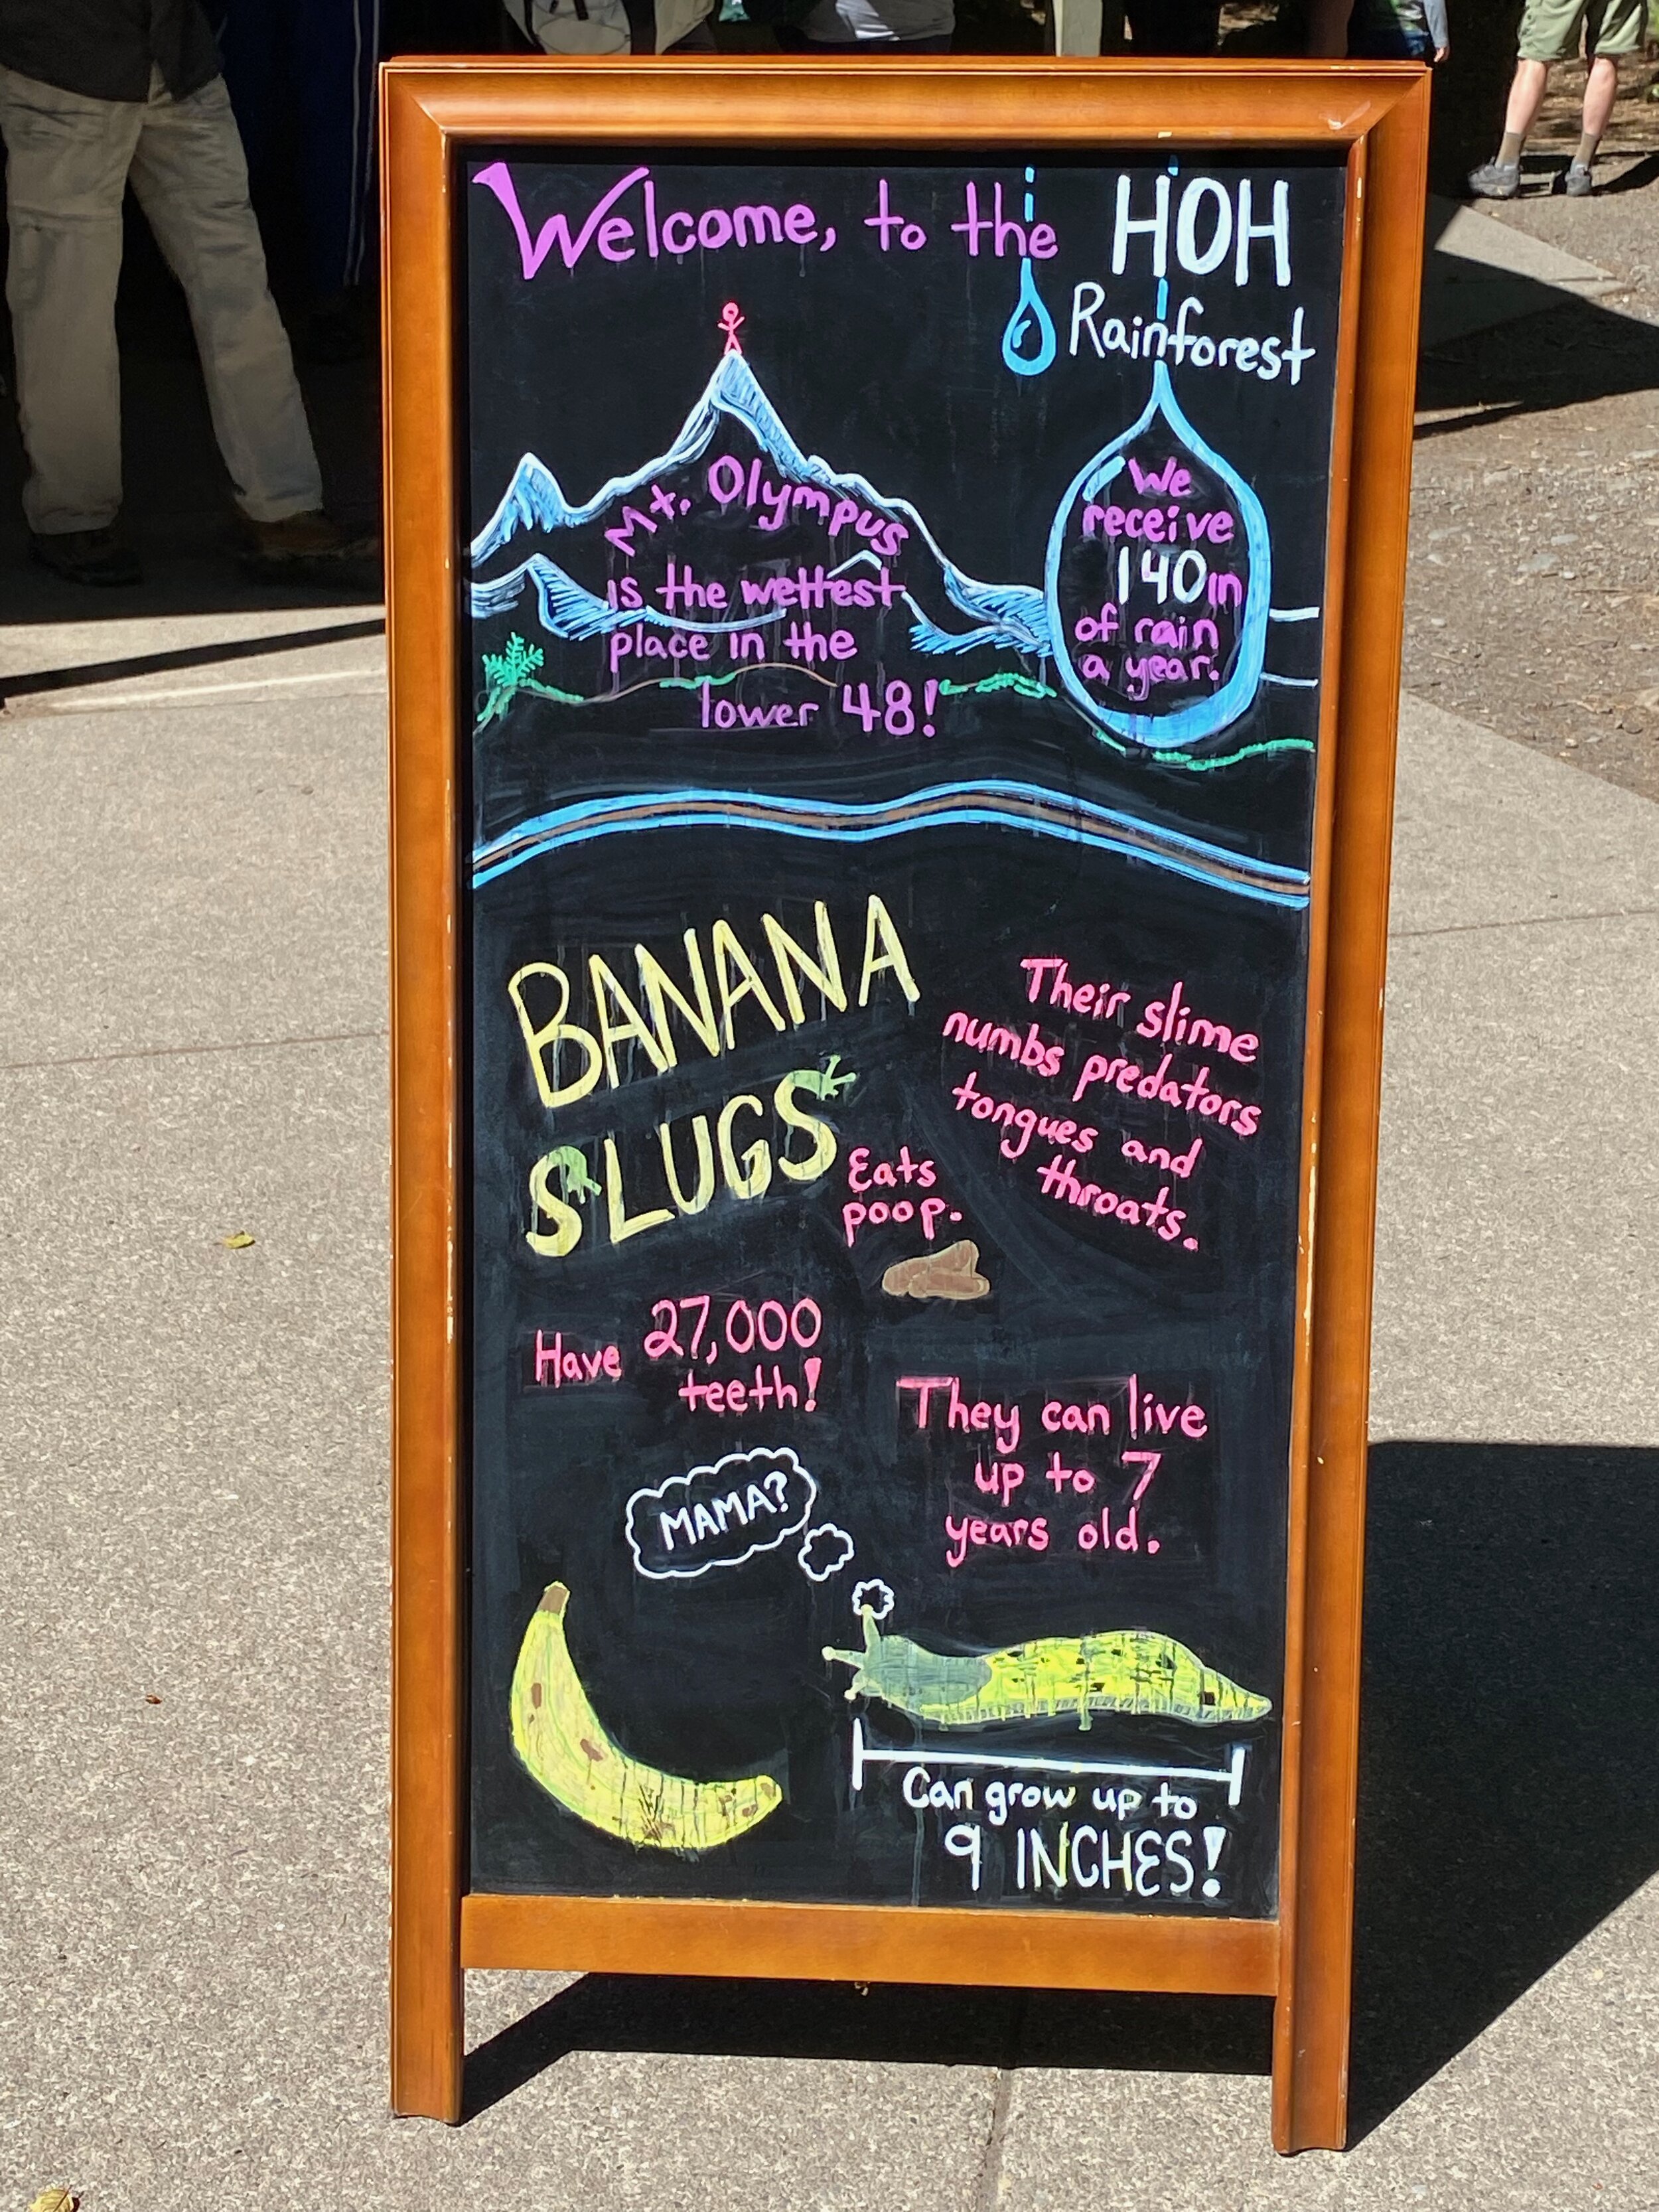 I just loved this colorful and informative sign about banana slugs.  They're pretty interesting little creatures.  Wish we had seen more!